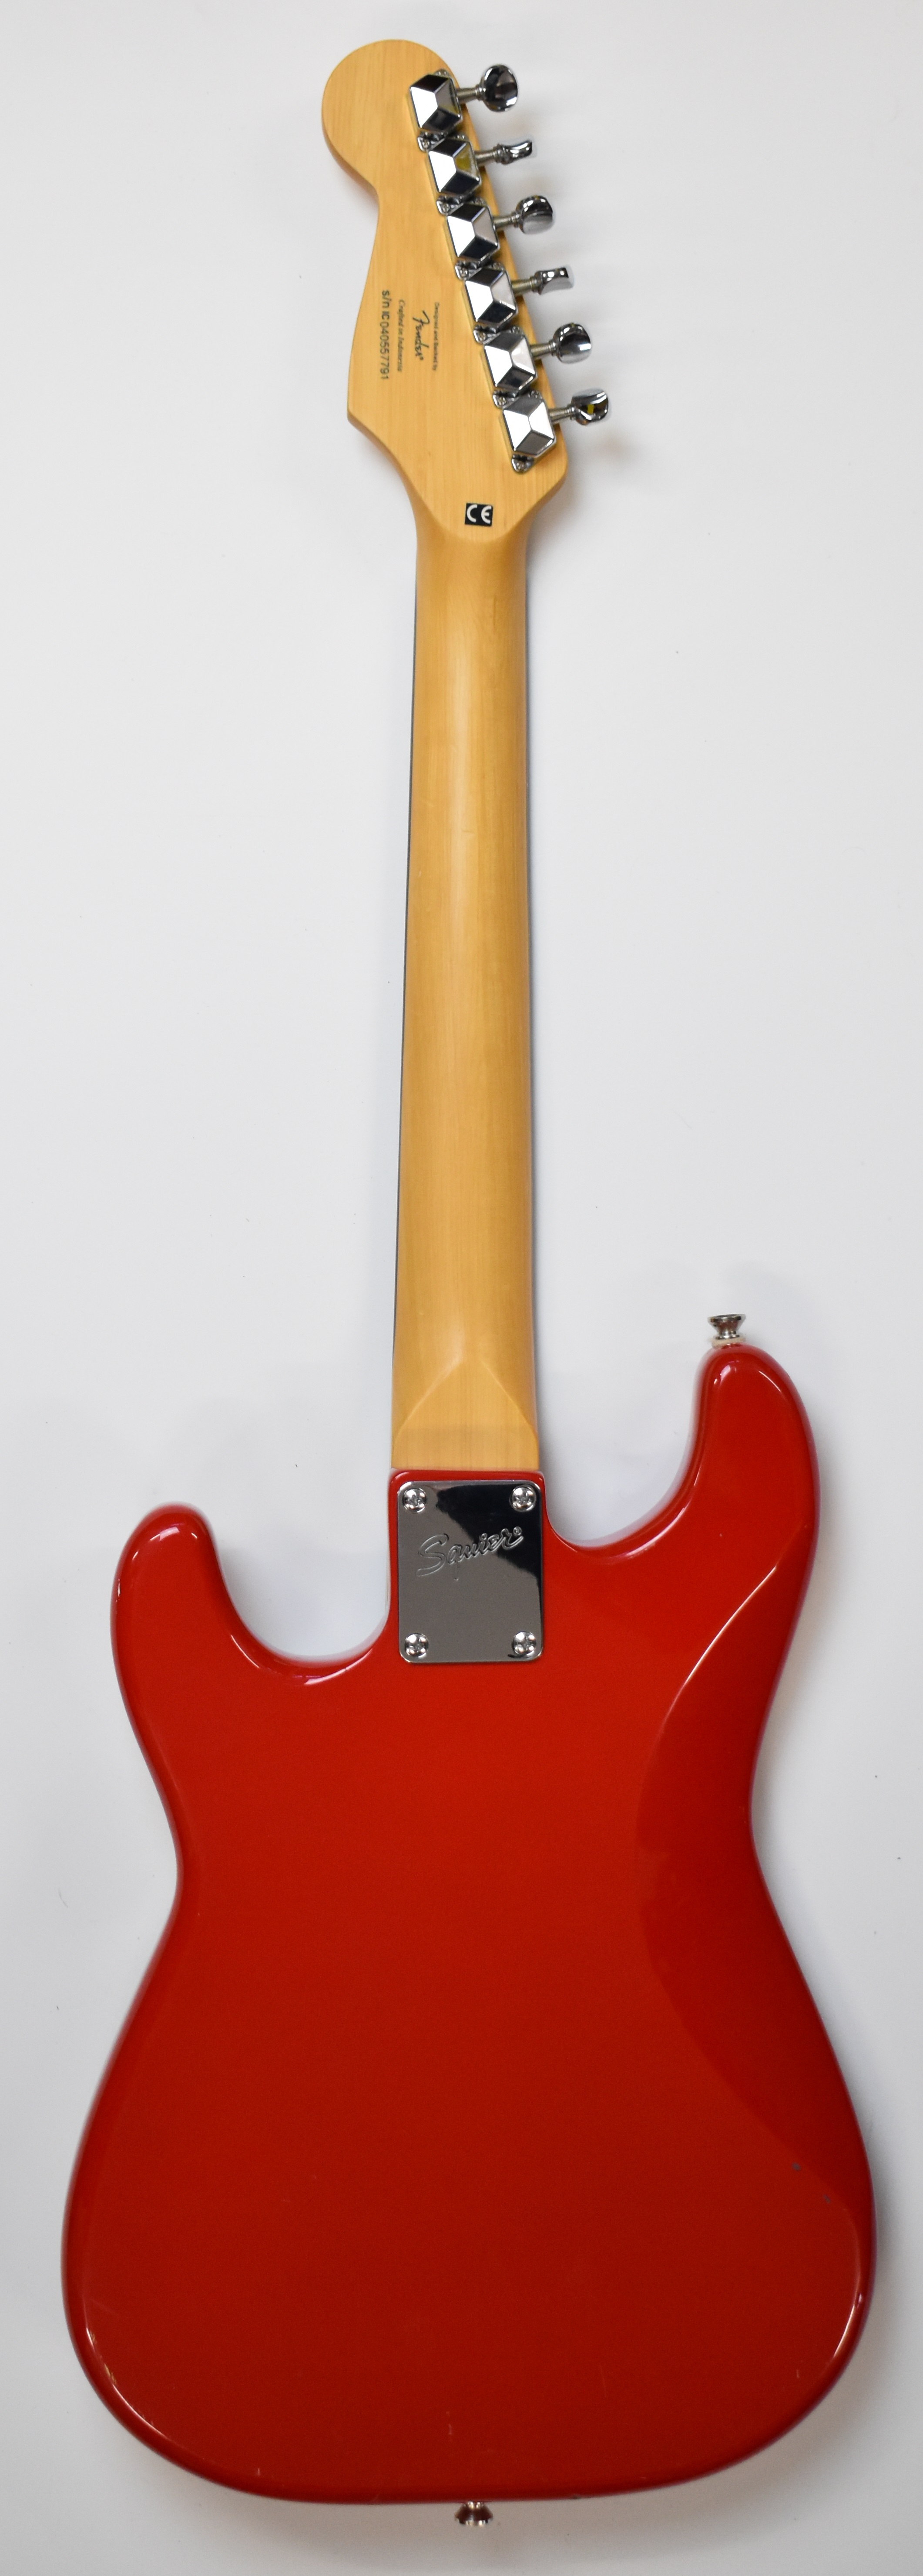 Squire Mini Stratocaster ¾ size electric guitar by Fender, with 20 frets and red finish, serial - Image 4 of 6